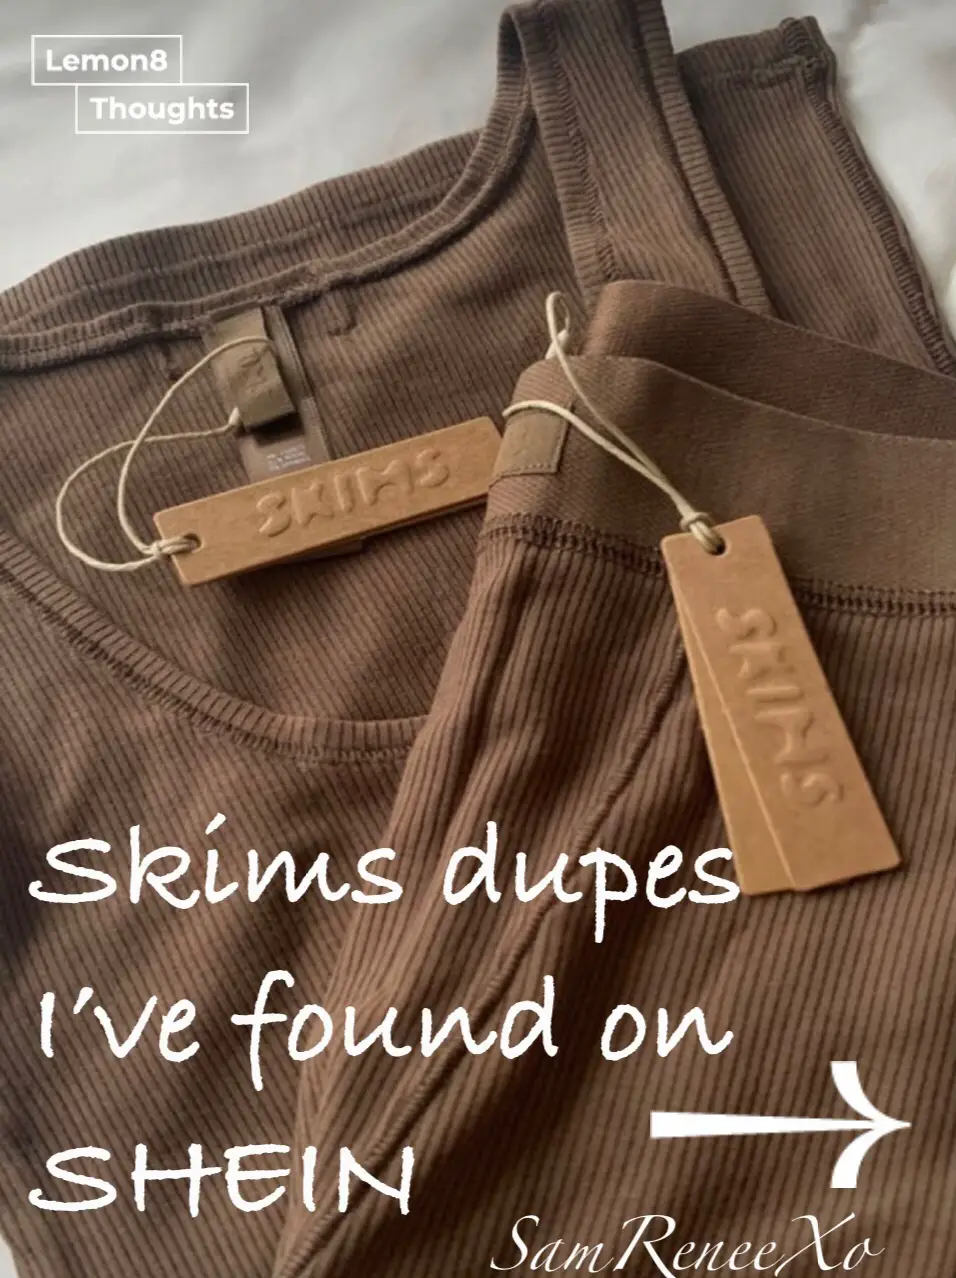 I got the skims dupes from shein and it was definitely worth it